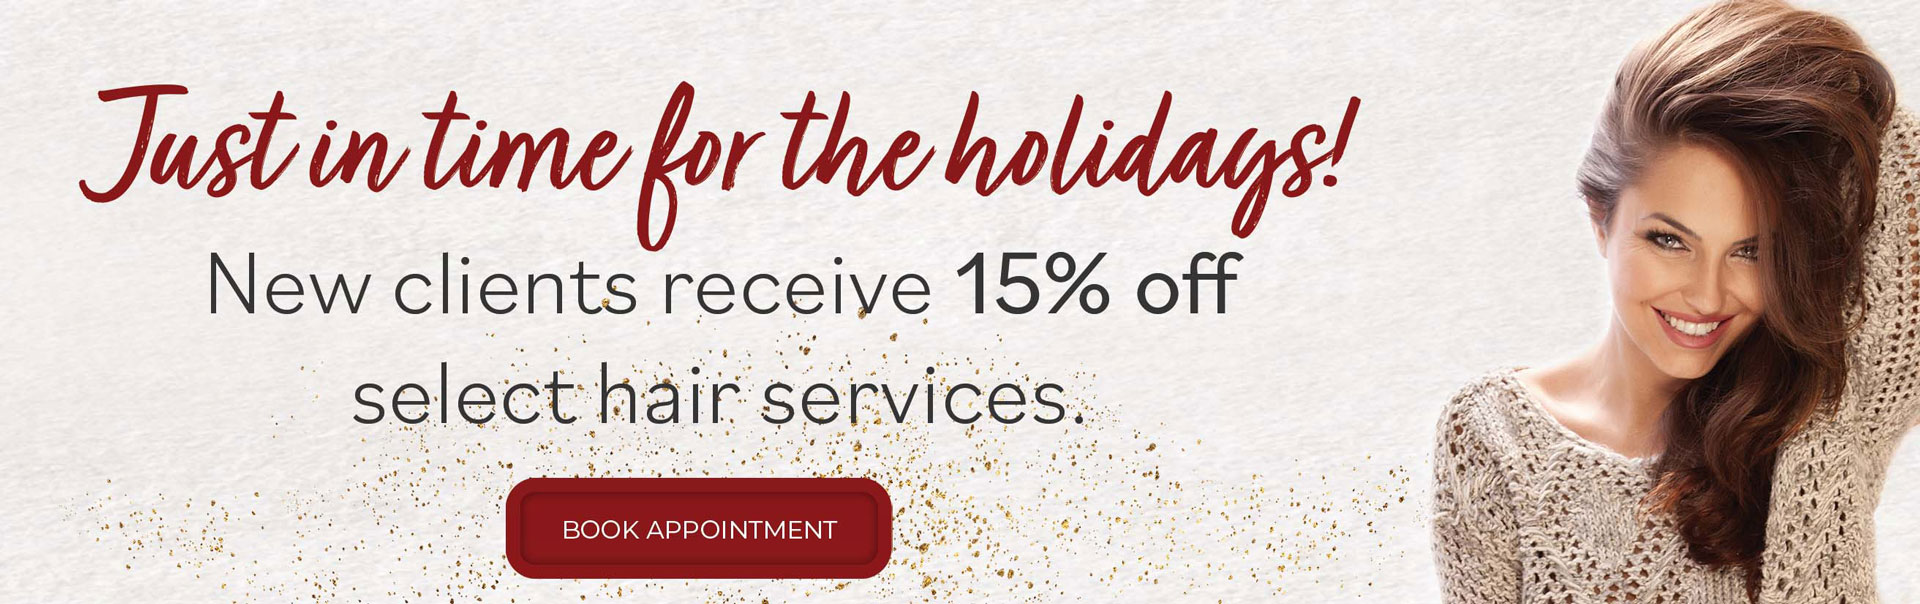 Just in time for the holidays! New clients receive 15% off select hair services. Book Appointment.